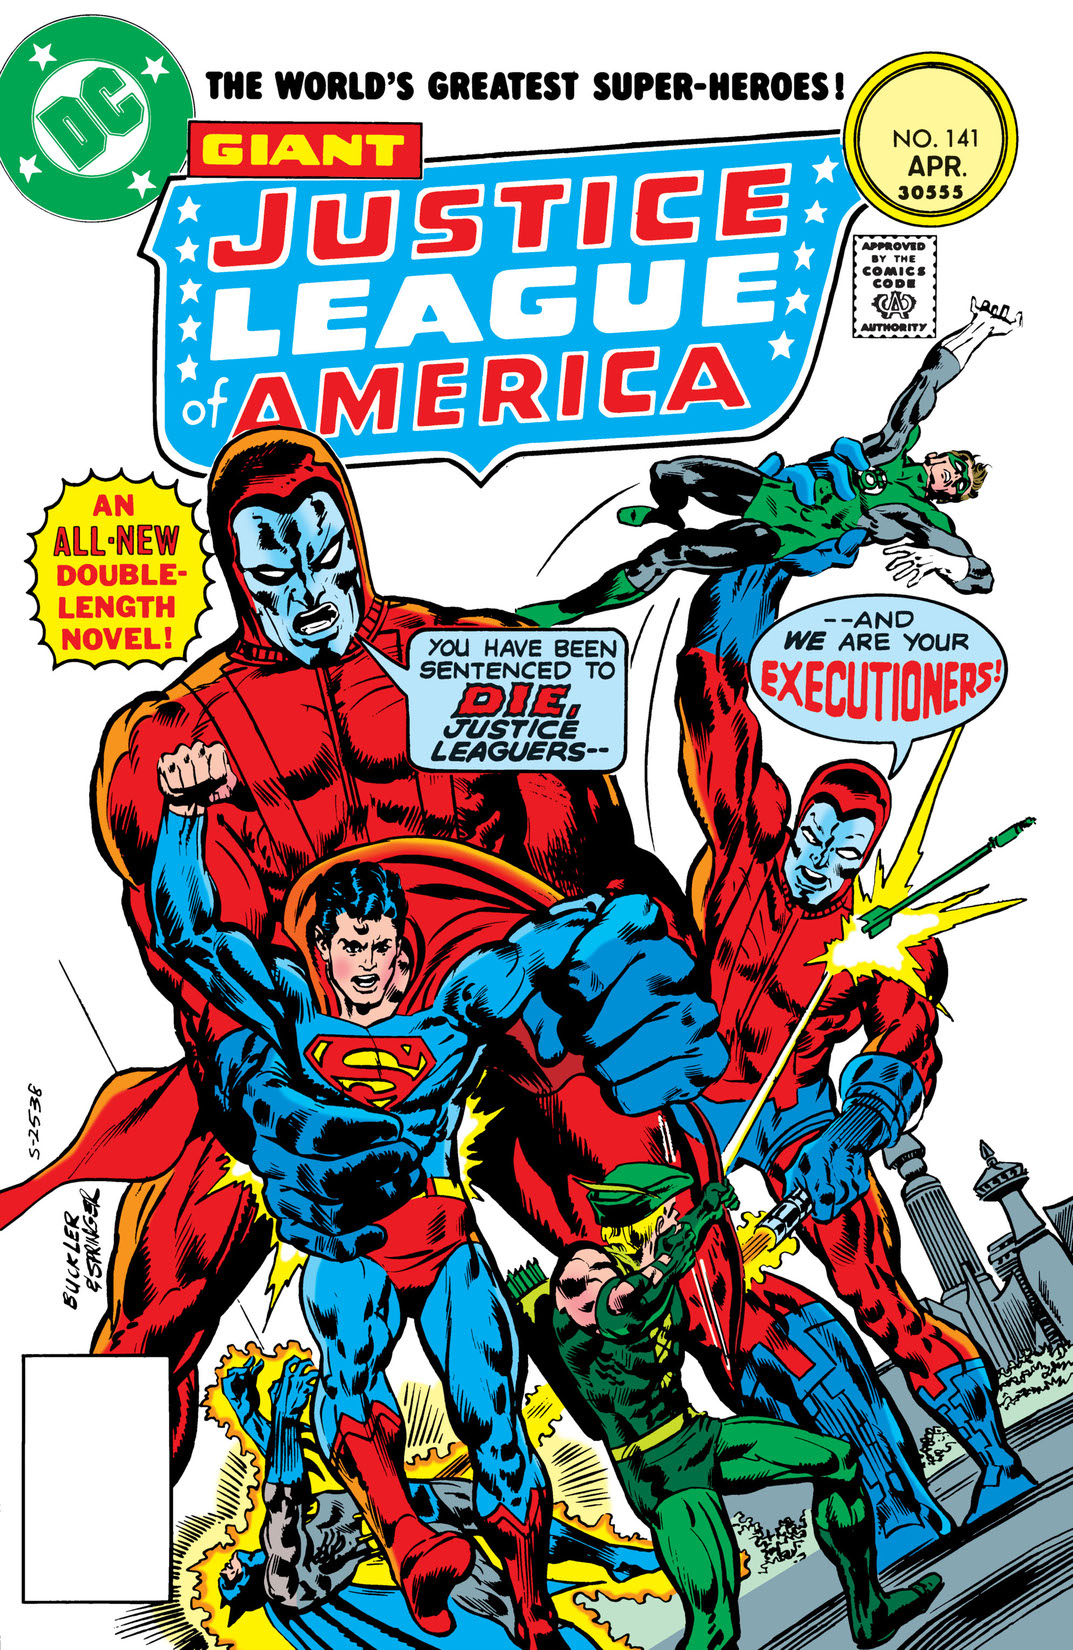 Justice League of America (1960-) #141 preview images